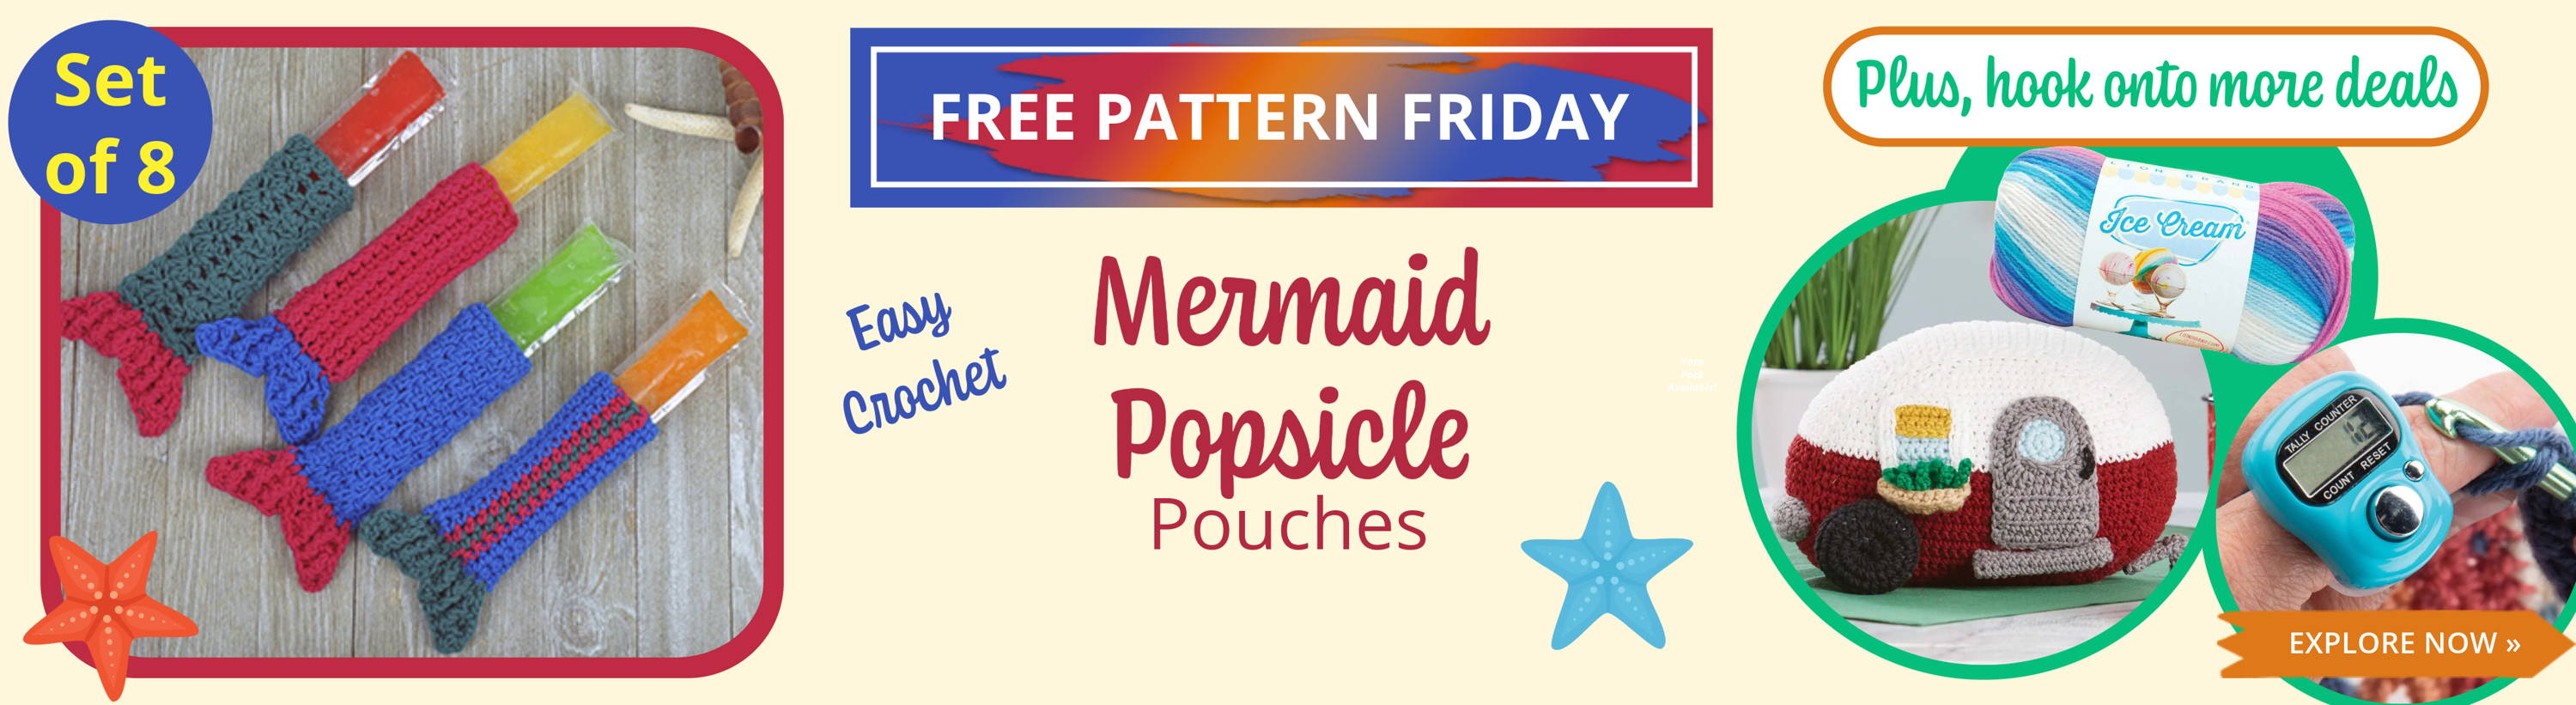 Free Pattern Friday! Mermaid Popsicle Pouches Set of 8 (Easy Crochet). Image: Mermaid Popsicle Pouches and featured projects to hook onto. 